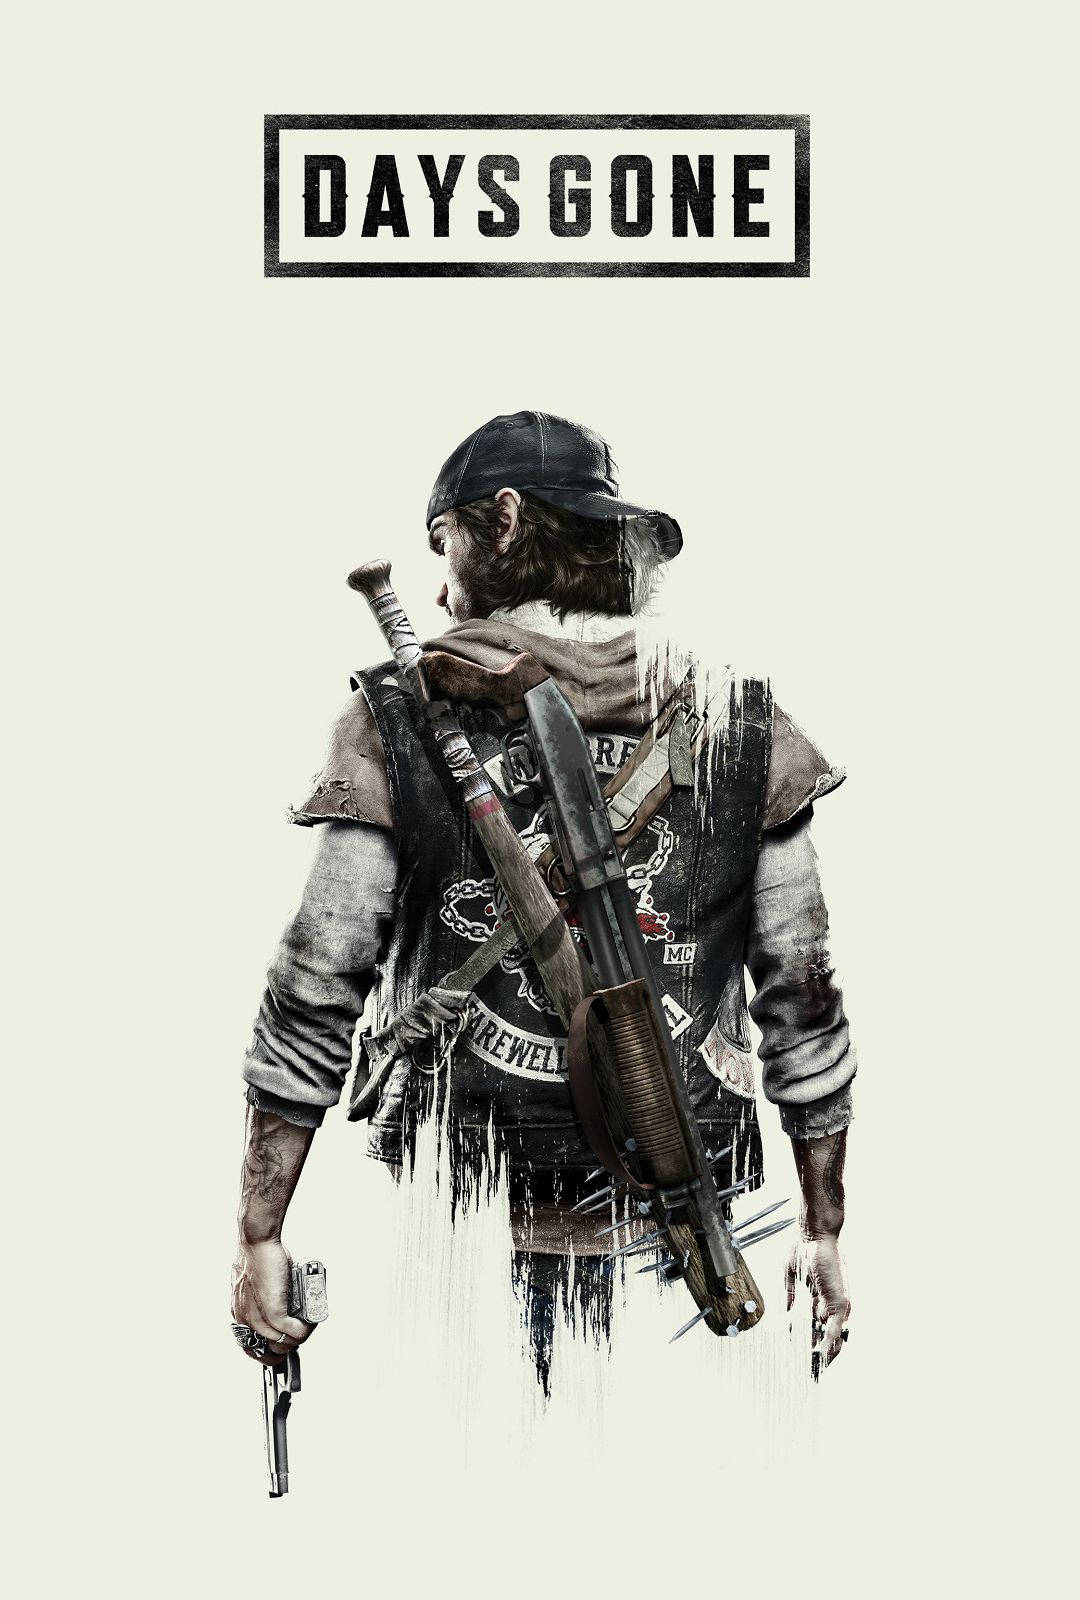 Get ready for an all-new post-apocalyptic horror, only with Days Gone! Wallpaper